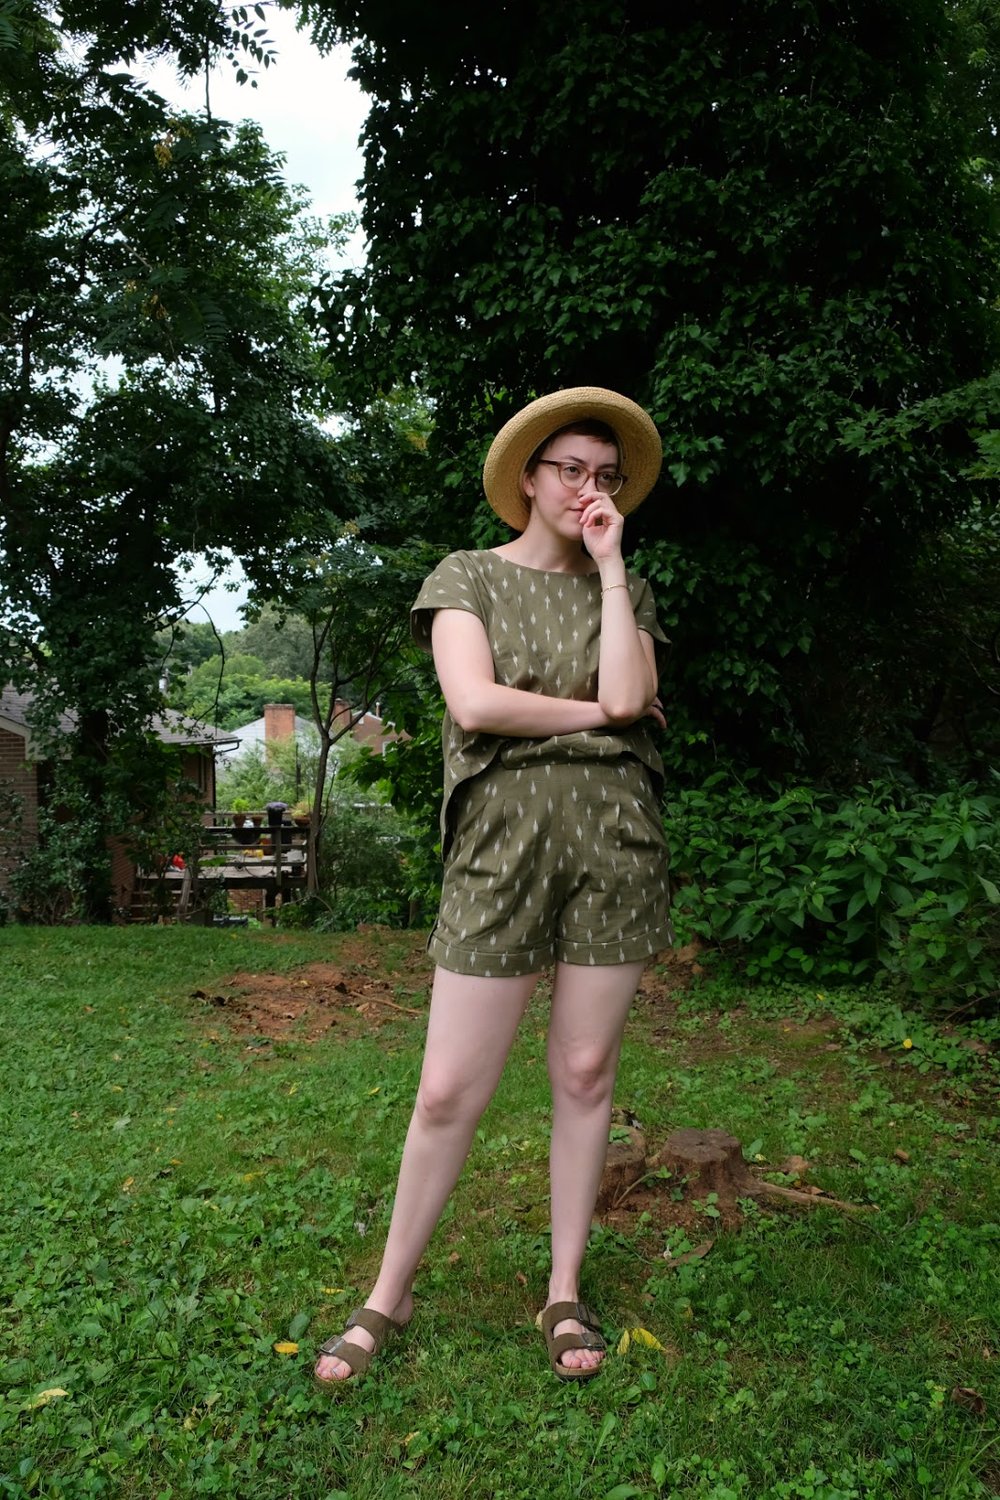 Leah stands in yard wearing a green romper and straw hat - Cultural Appropriation in Fashion